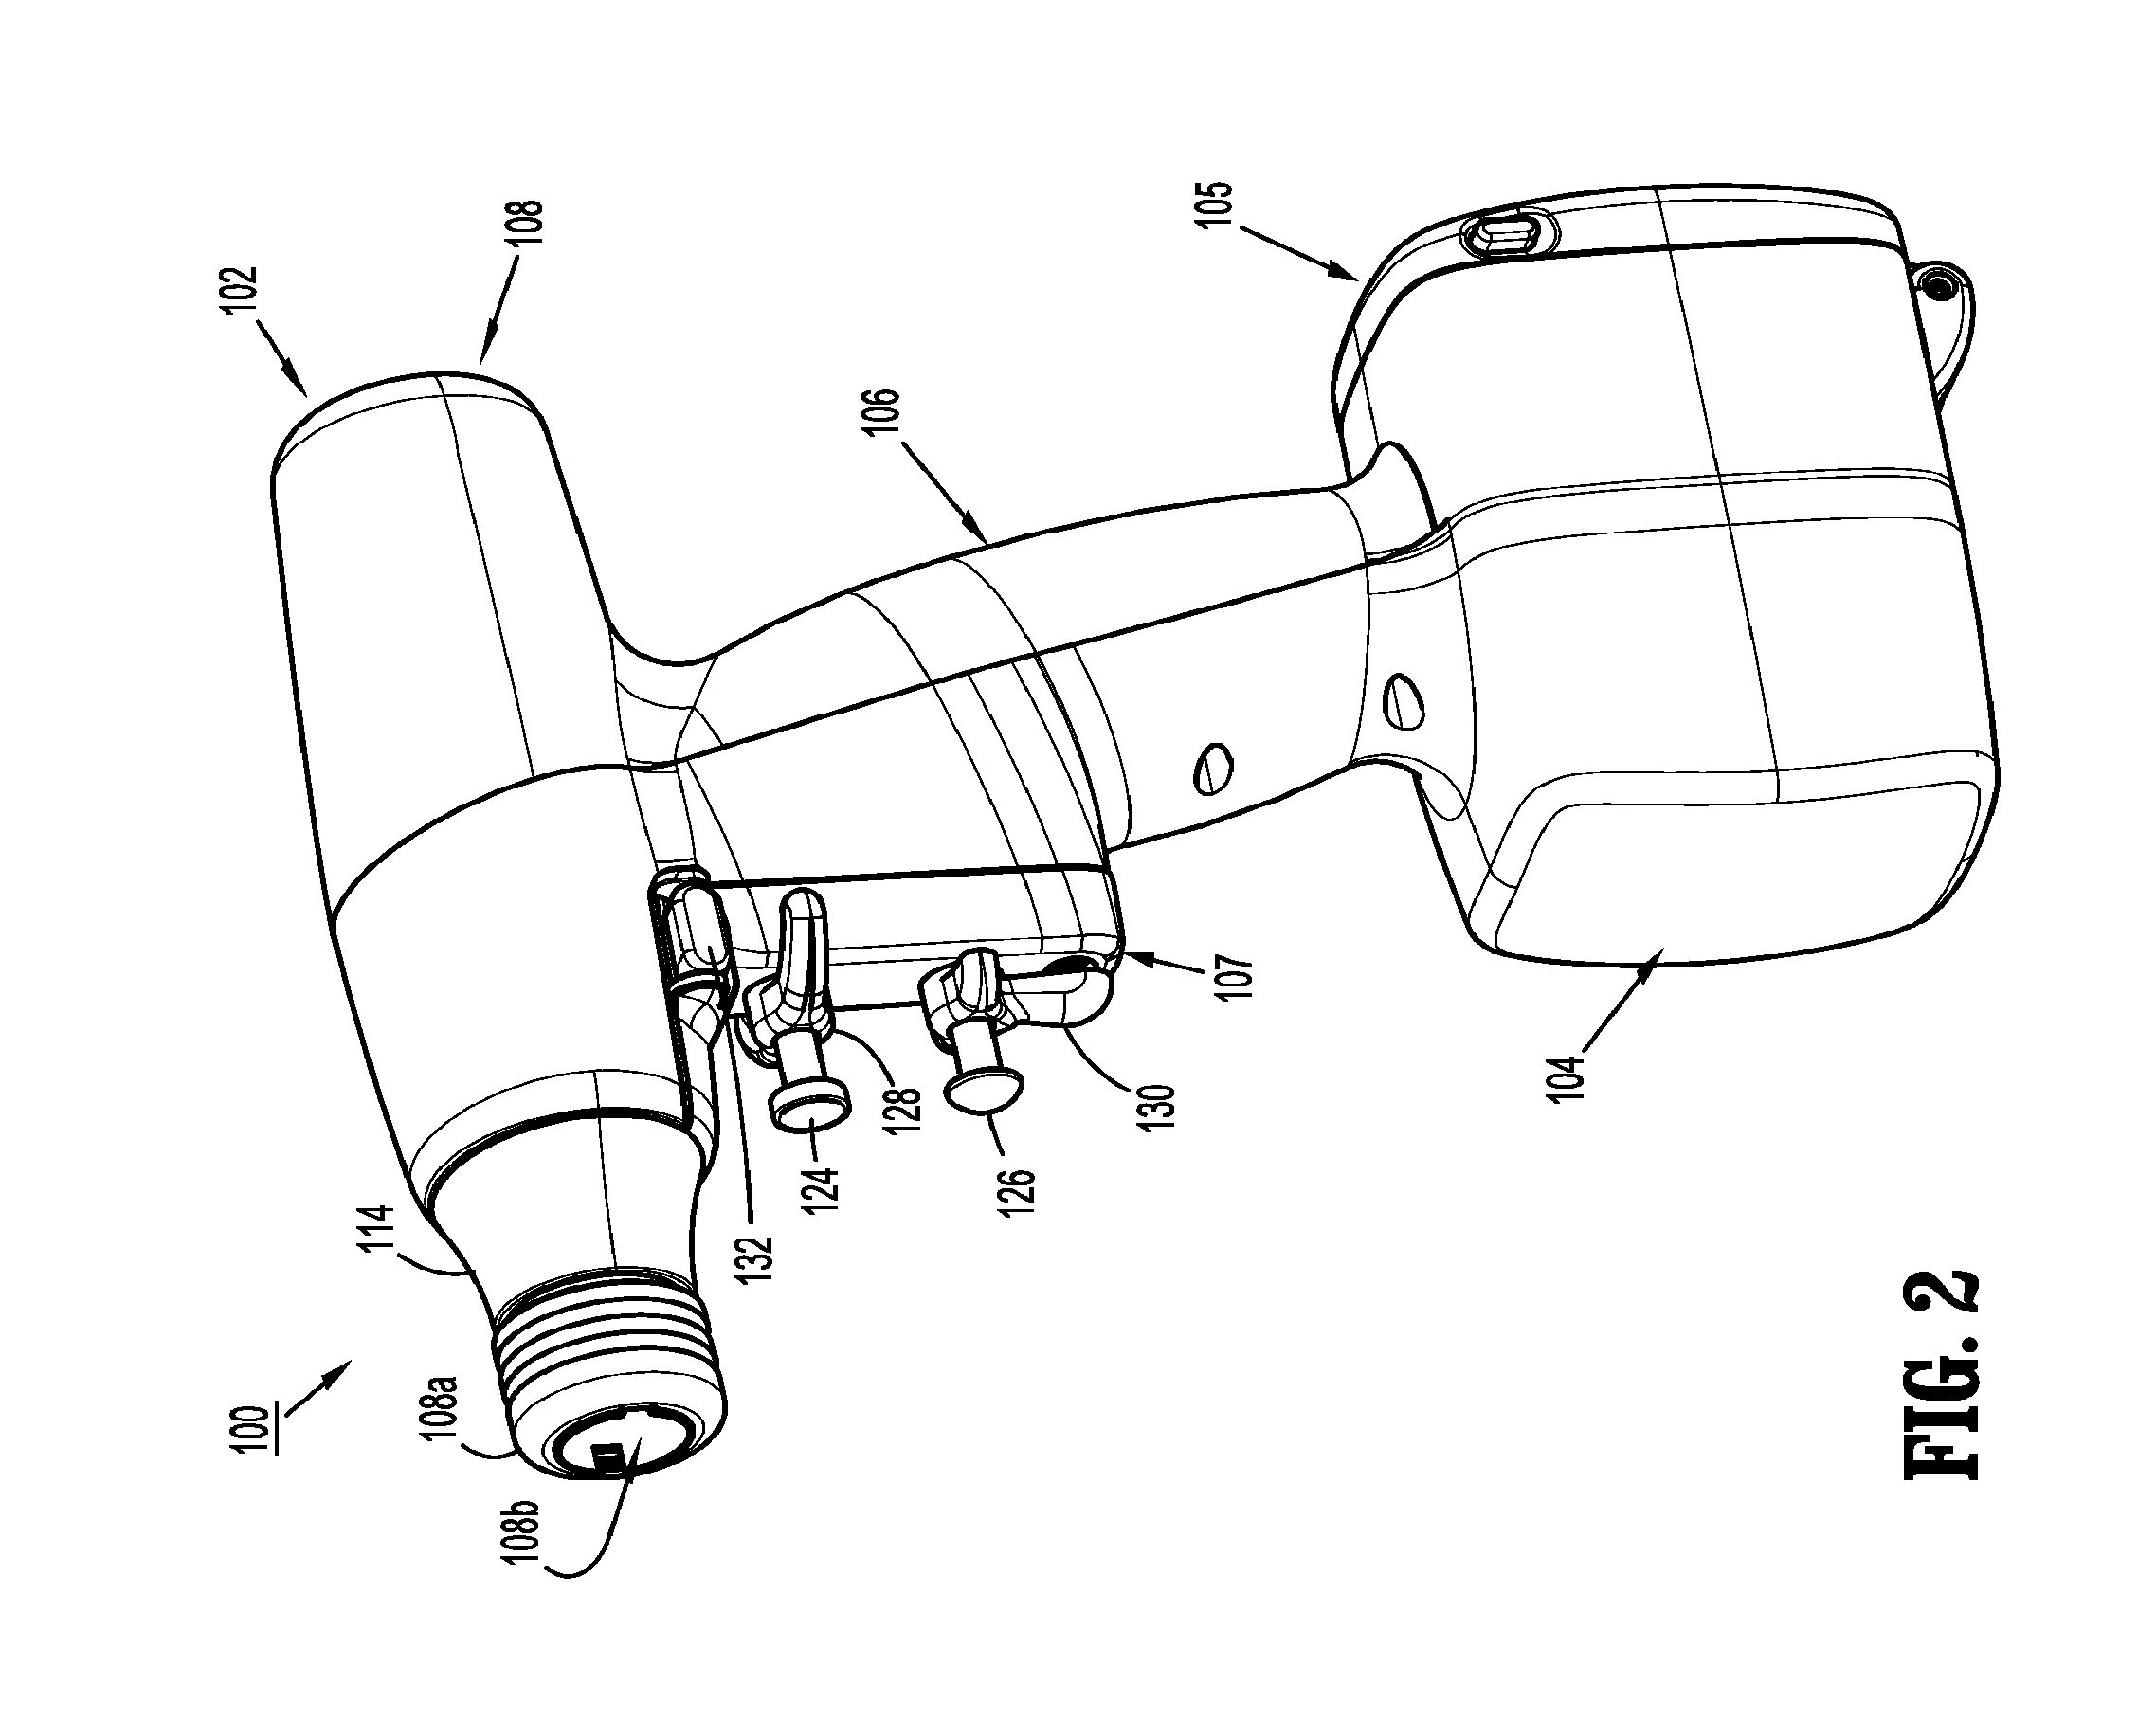 Intelligent adapter assembly for use with an electromechanical surgical system